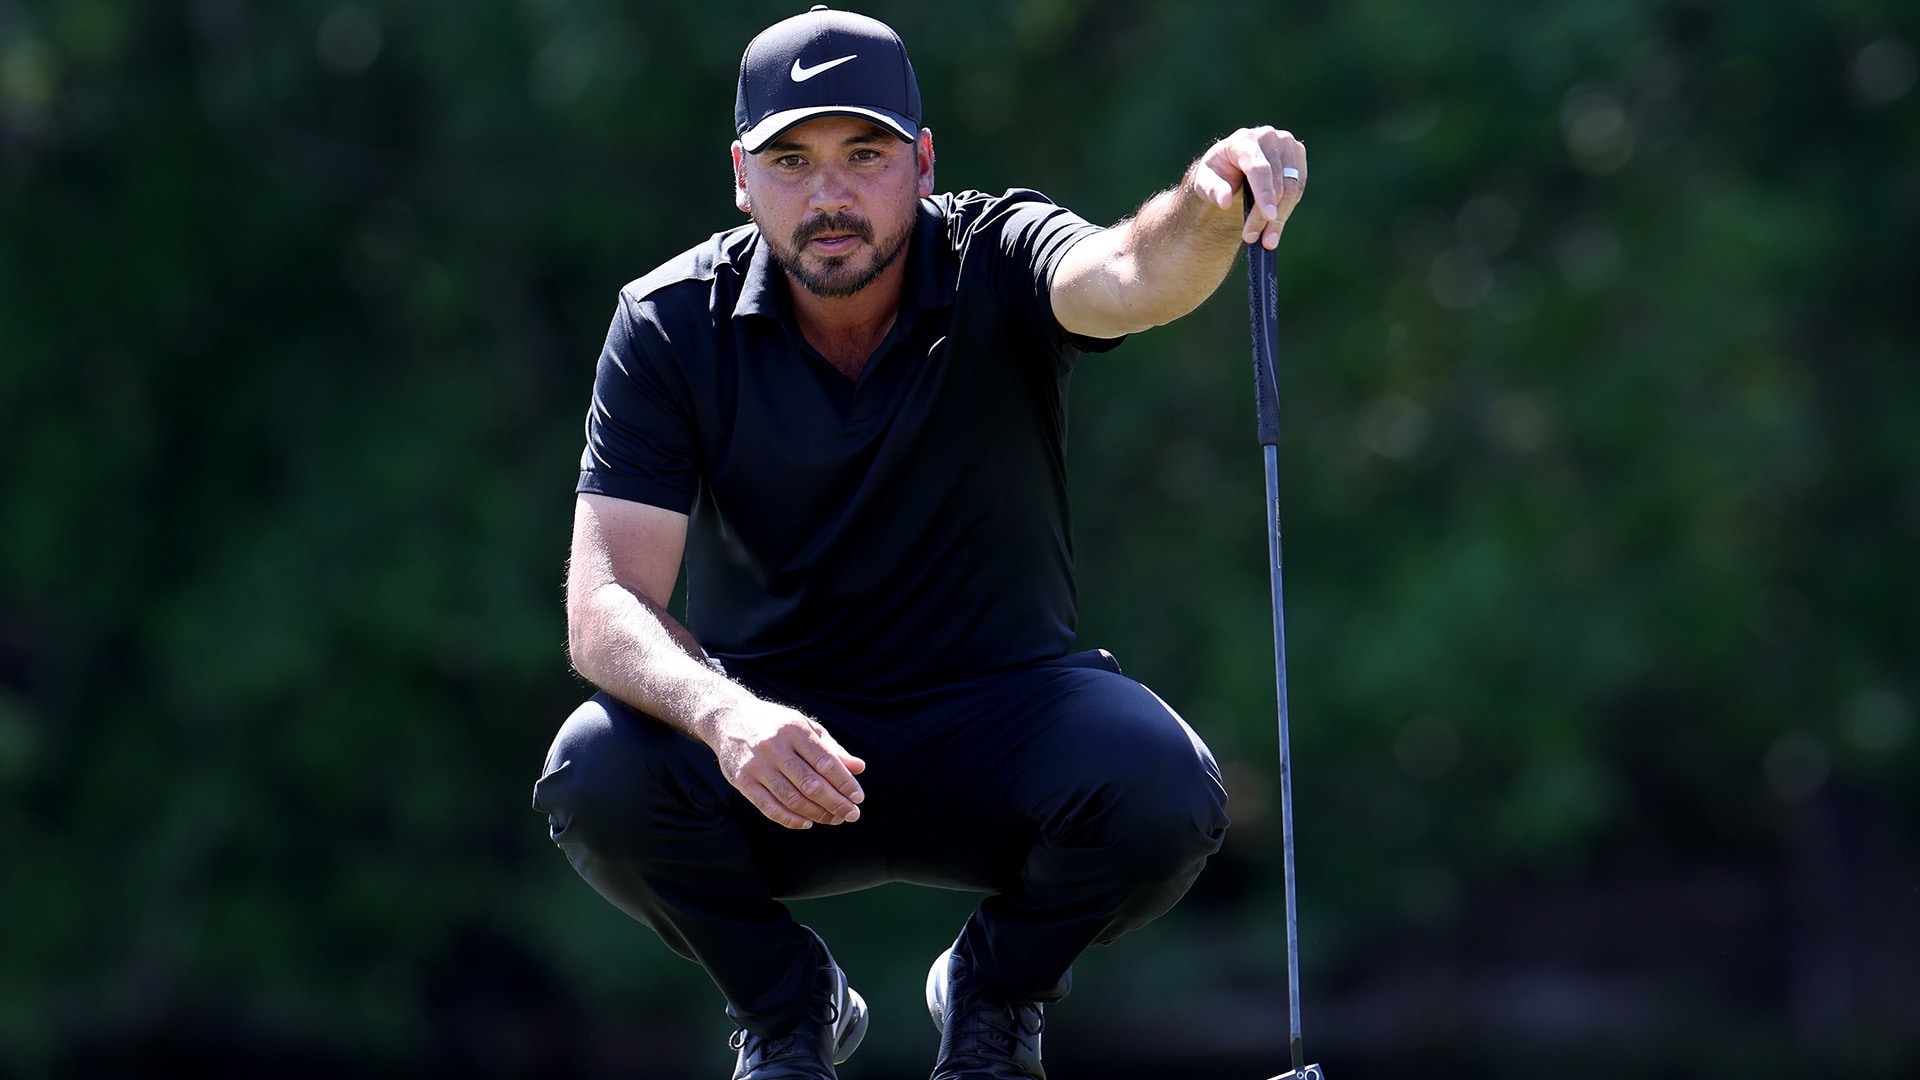 Jason Day pleased despite loss in quarterfinals: ‘step in the right direction’